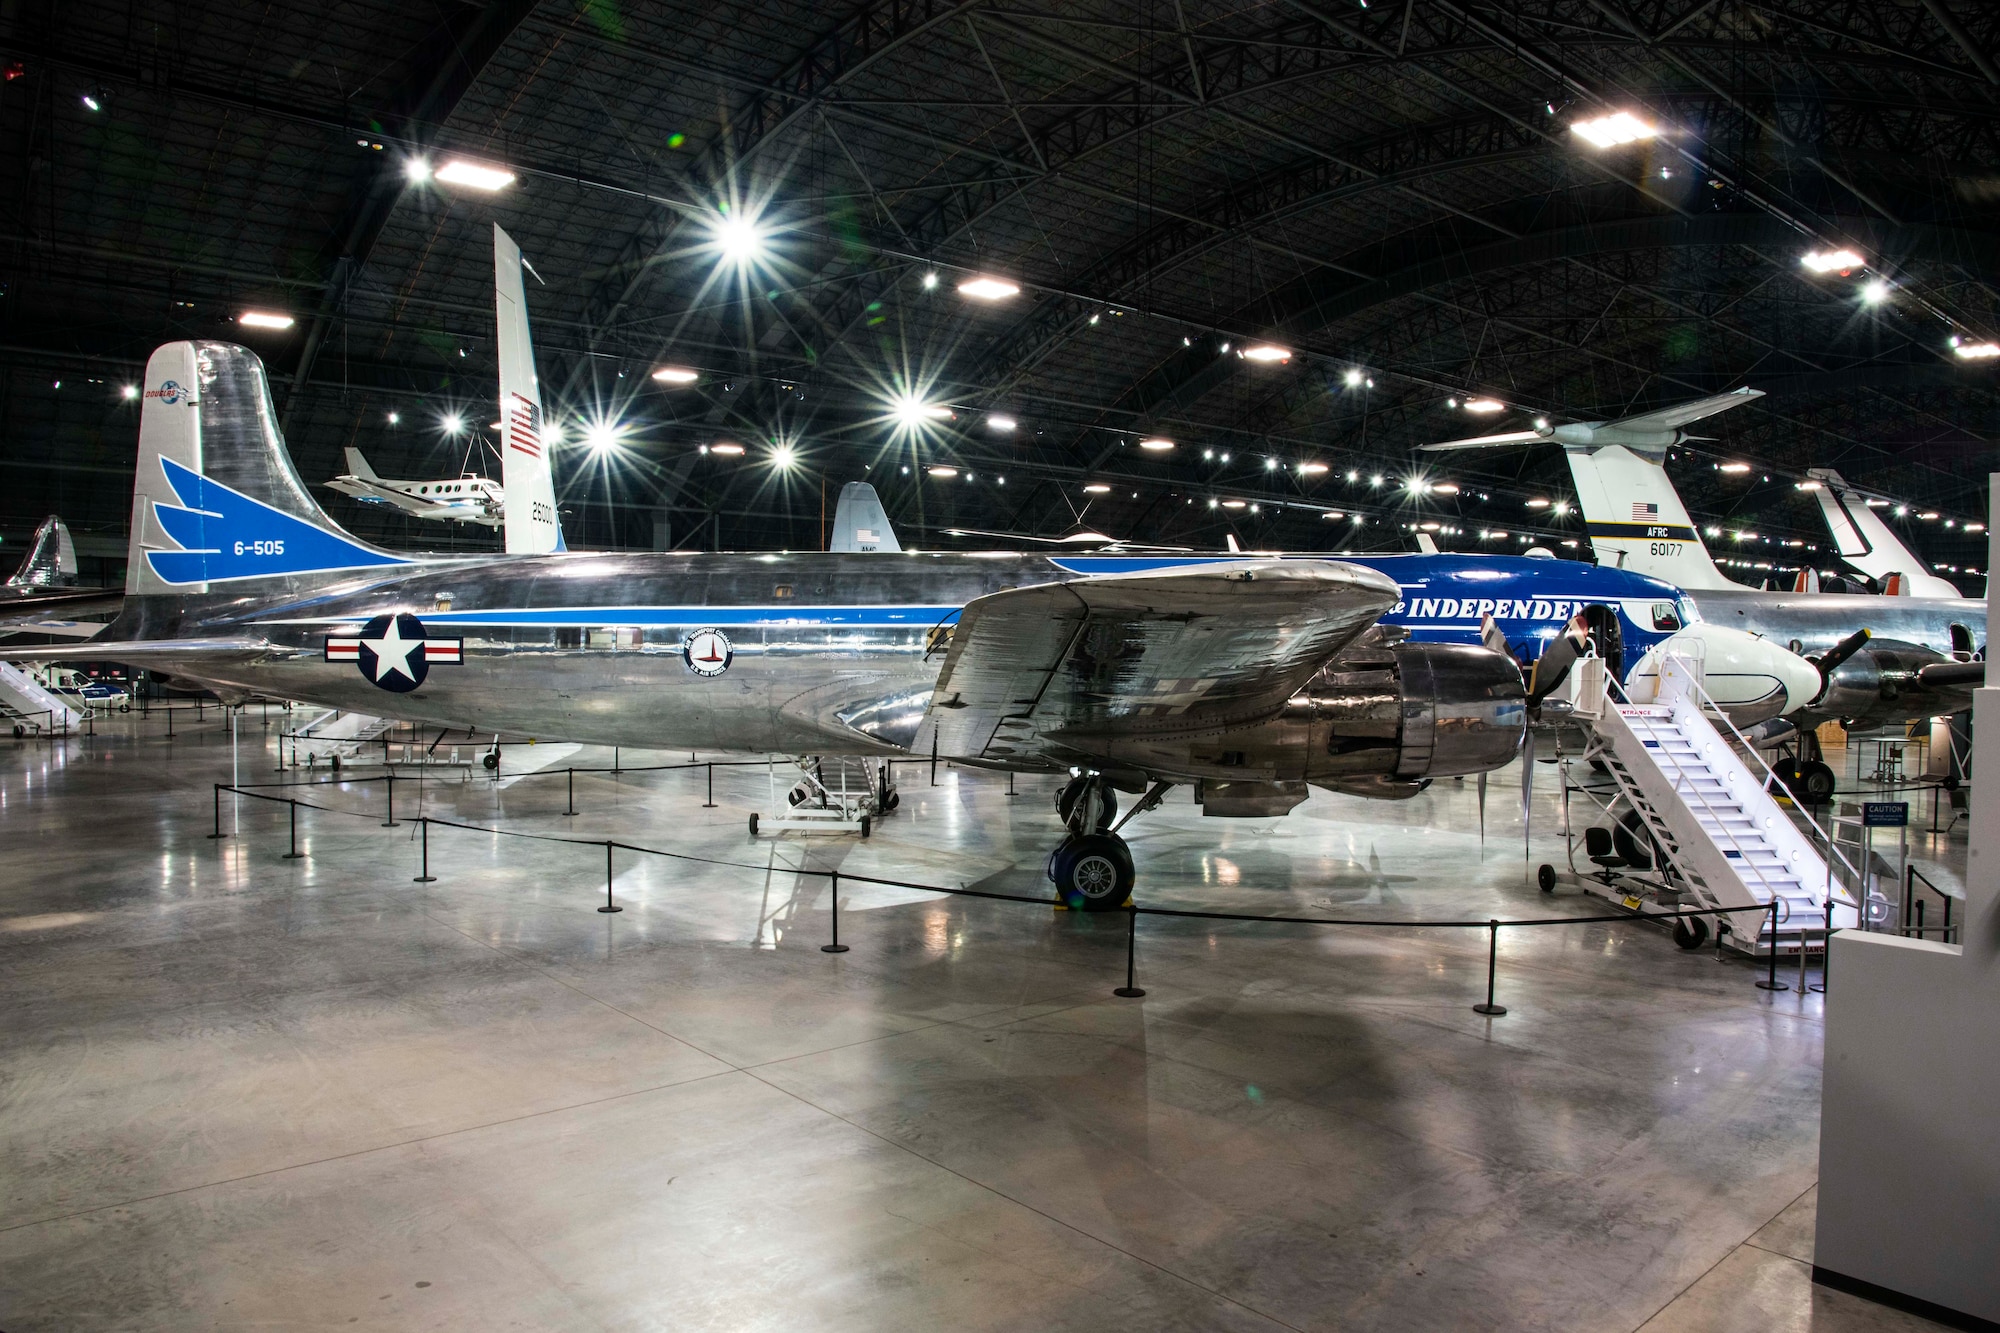 DAYTON, Ohio -- The Douglas VC-118 “Independence” on display in the Presidential Gallery at the National Museum of the United States Air Force. (U.S. Air Force photo by Ken LaRock)